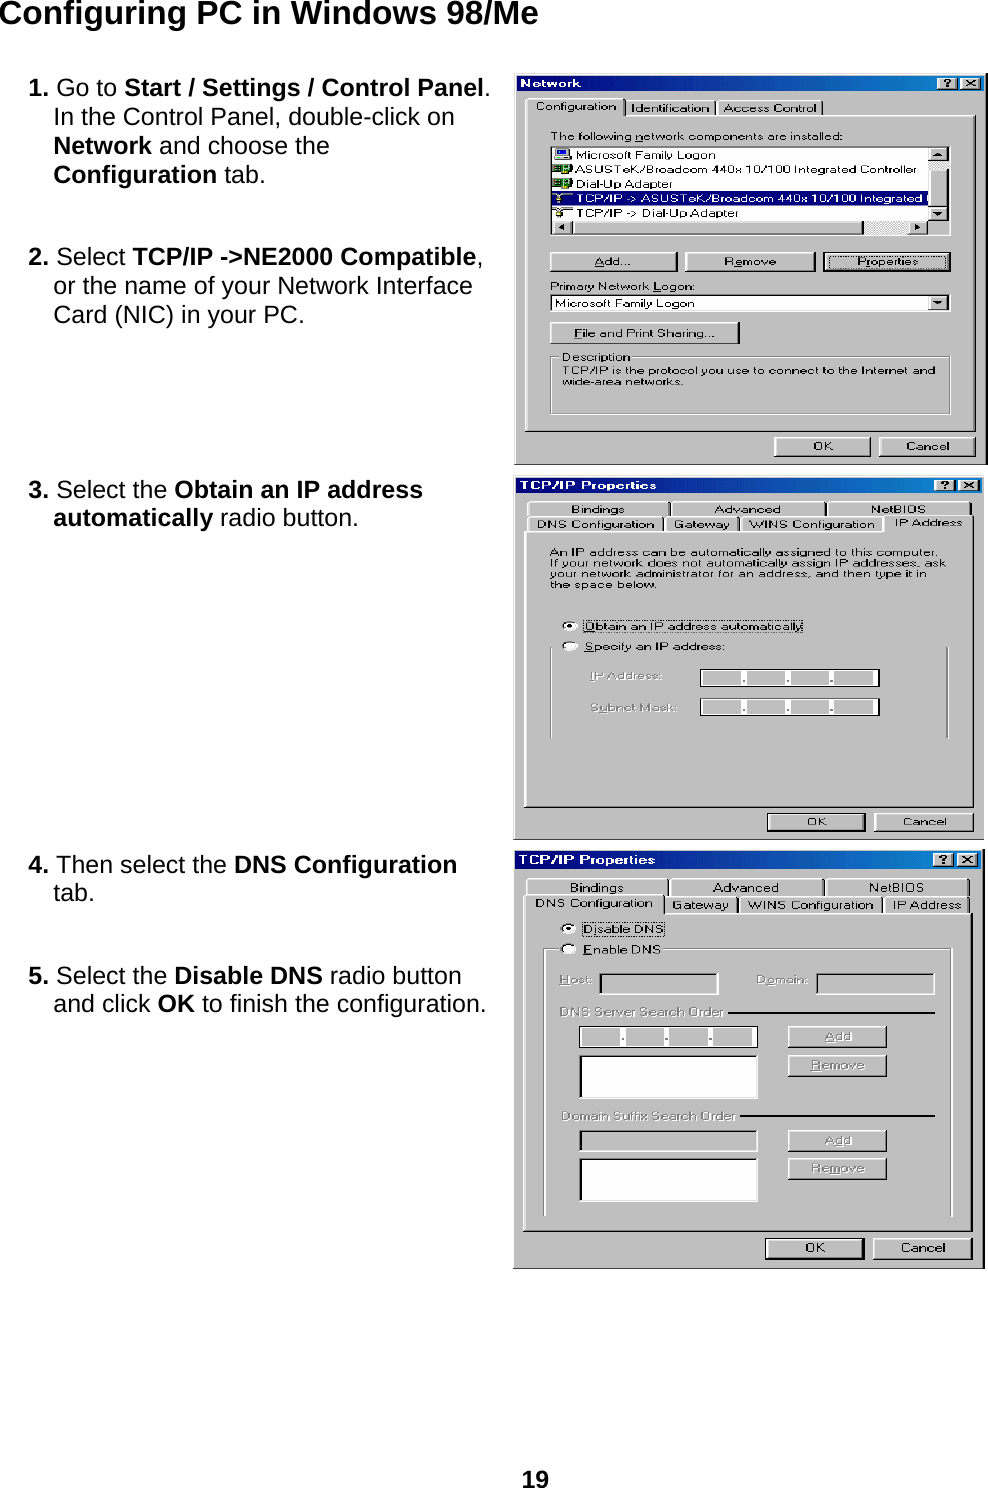  19 Configuring PC in Windows 98/Me  1. Go to Start / Settings / Control Panel. In the Control Panel, double-click on Network and choose the Configuration tab.  2. Select TCP/IP -&gt;NE2000 Compatible, or the name of your Network Interface Card (NIC) in your PC.   3. Select the Obtain an IP address automatically radio button.  4. Then select the DNS Configuration tab.  5. Select the Disable DNS radio button and click OK to finish the configuration.      